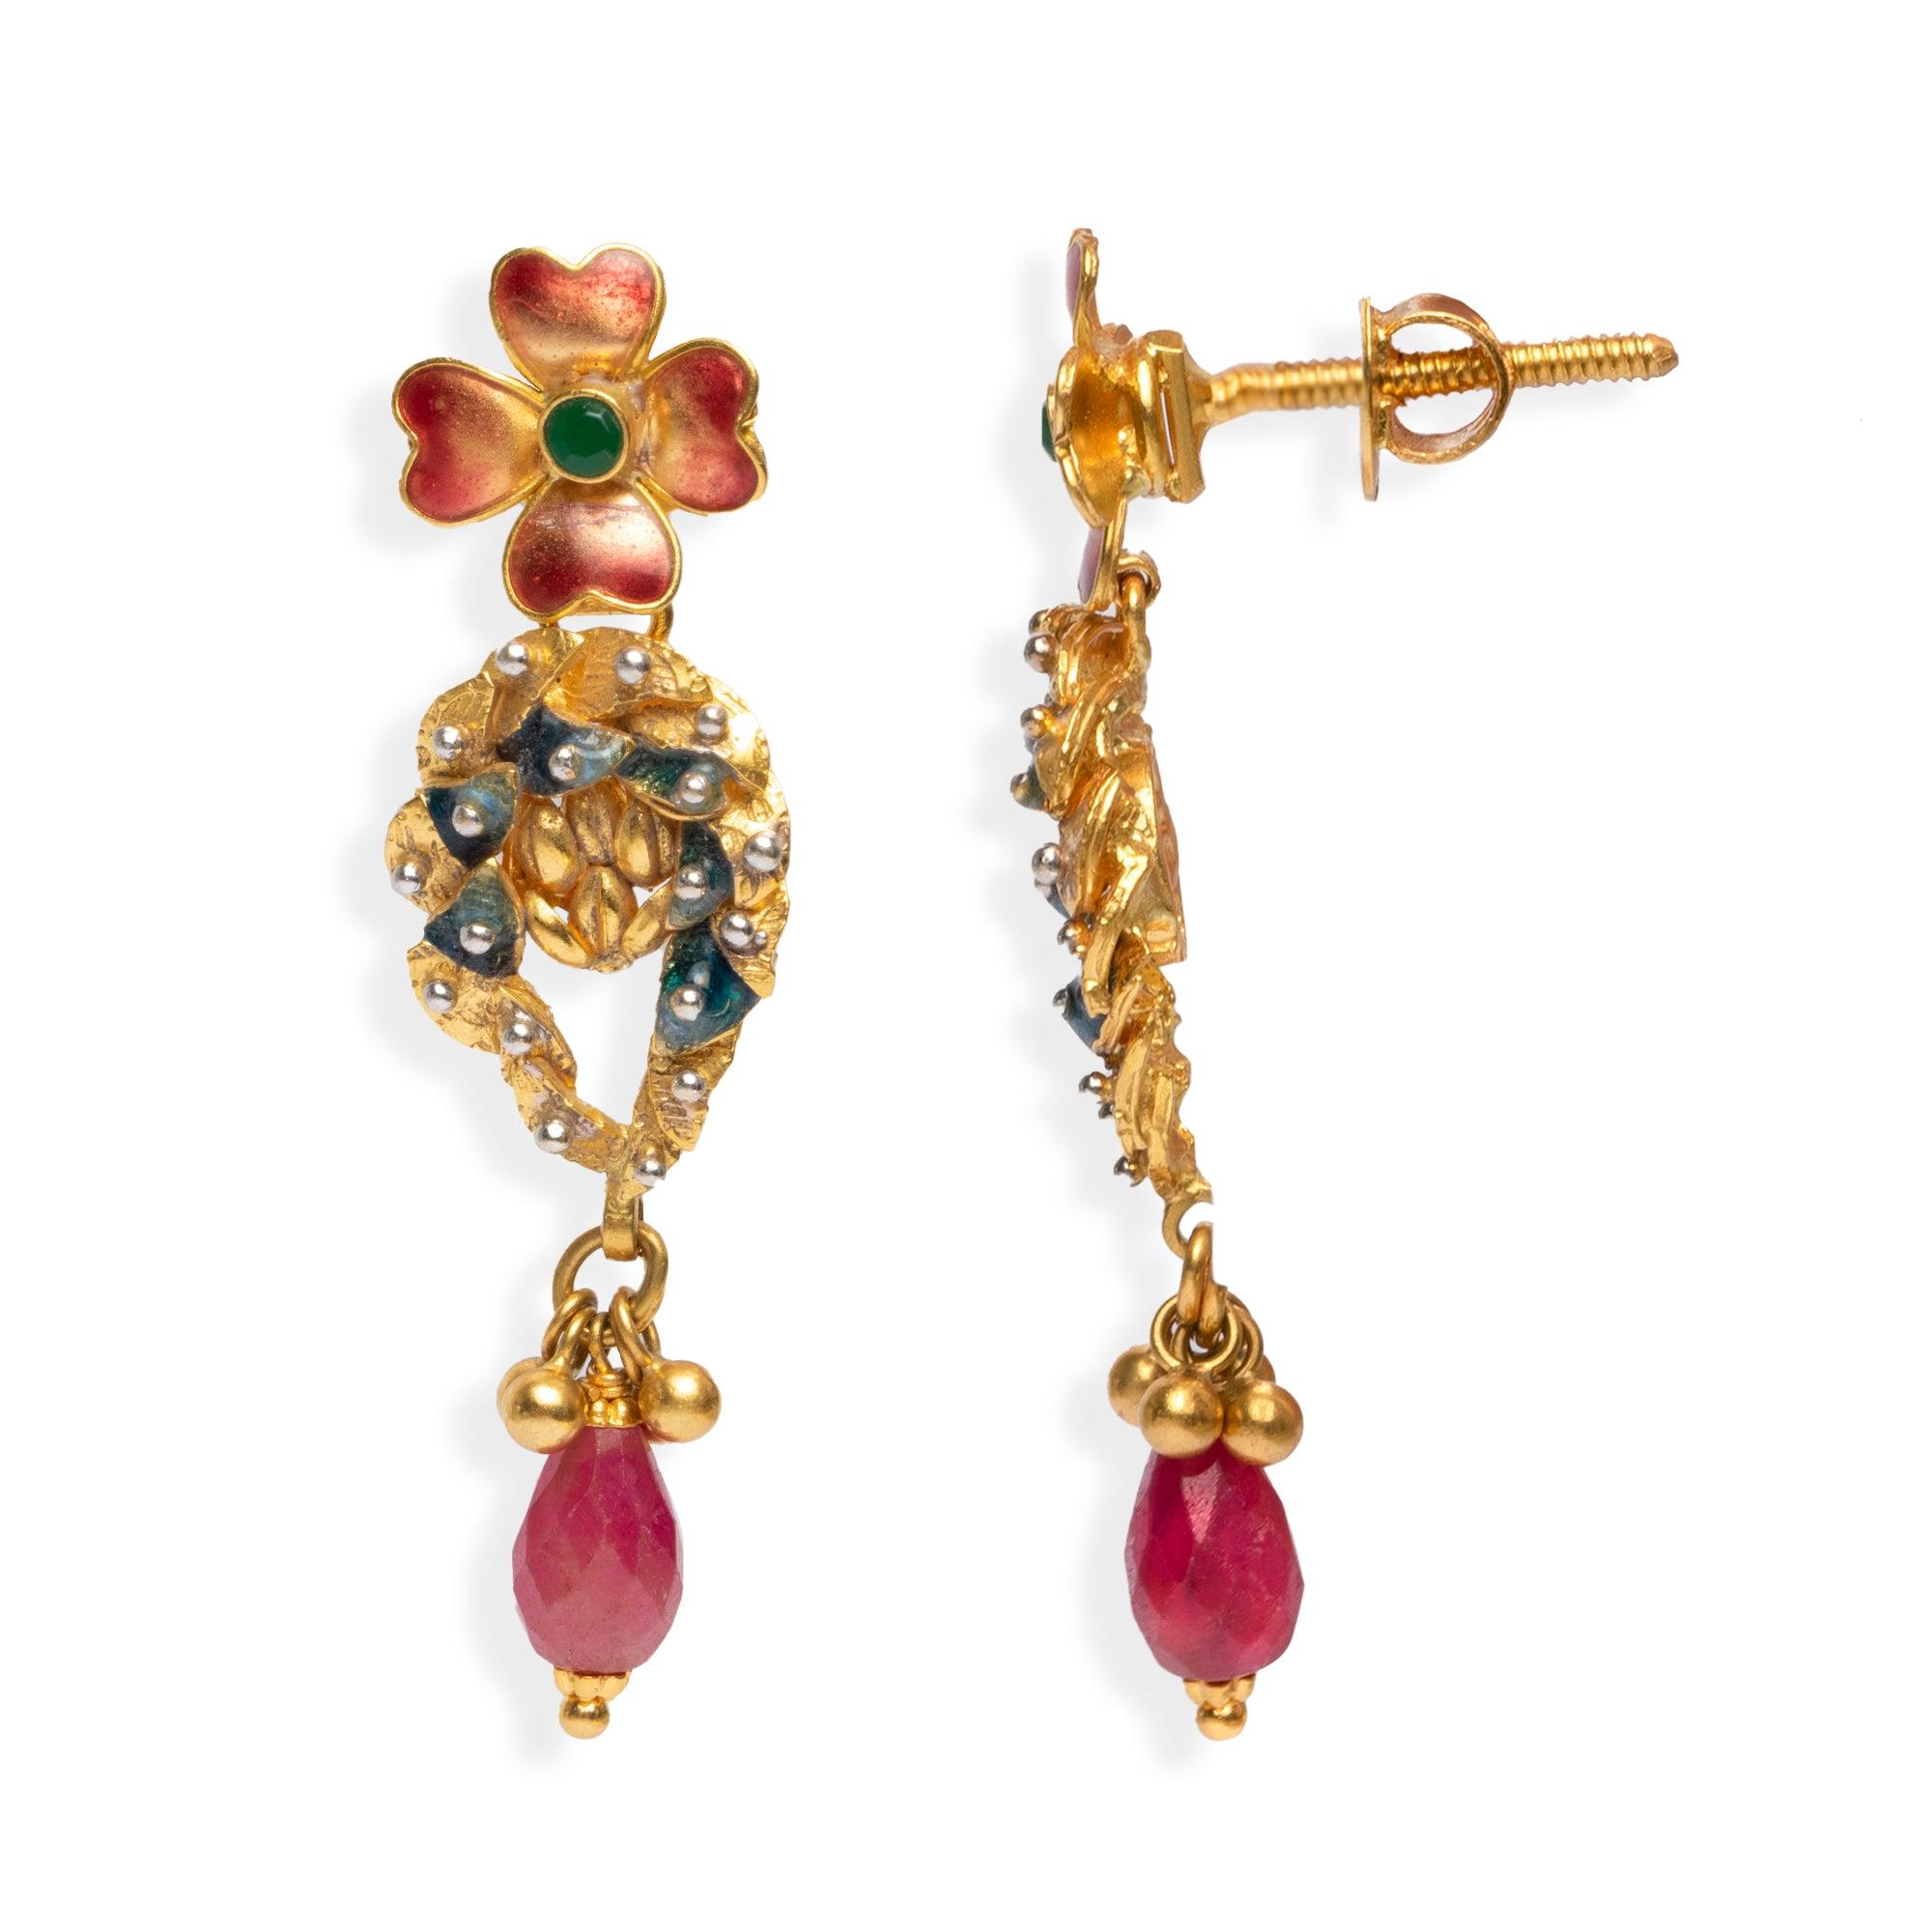 22ct Gold Enamel and Cubic Zirconia Drop Earrings with Flower Design (10.4g) E-3350